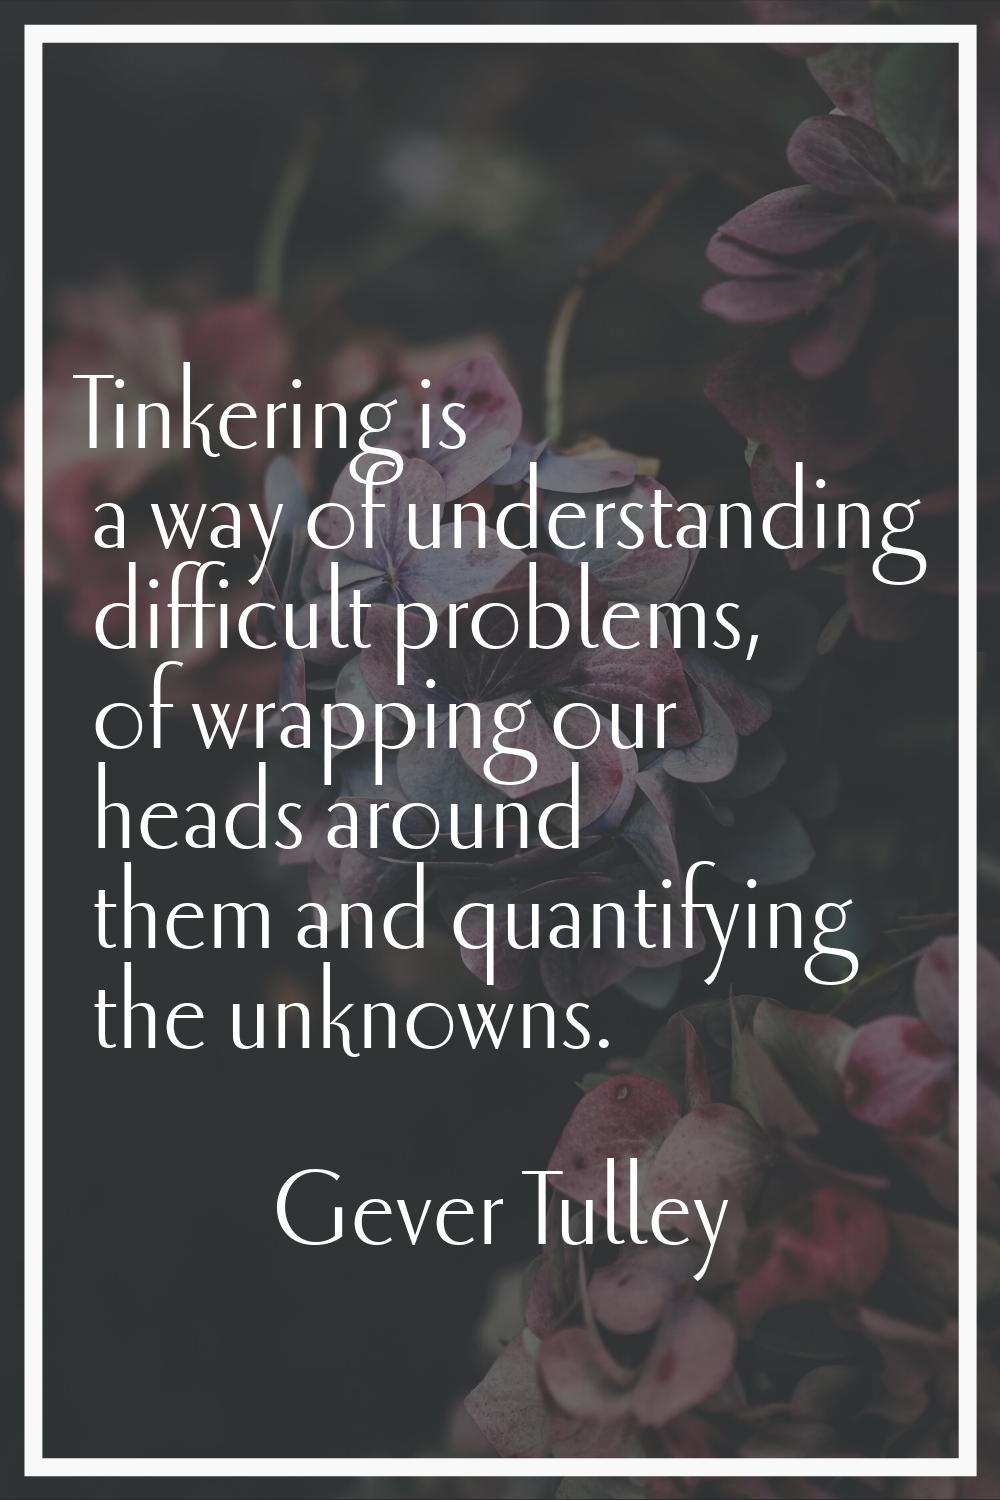 Tinkering is a way of understanding difficult problems, of wrapping our heads around them and quant